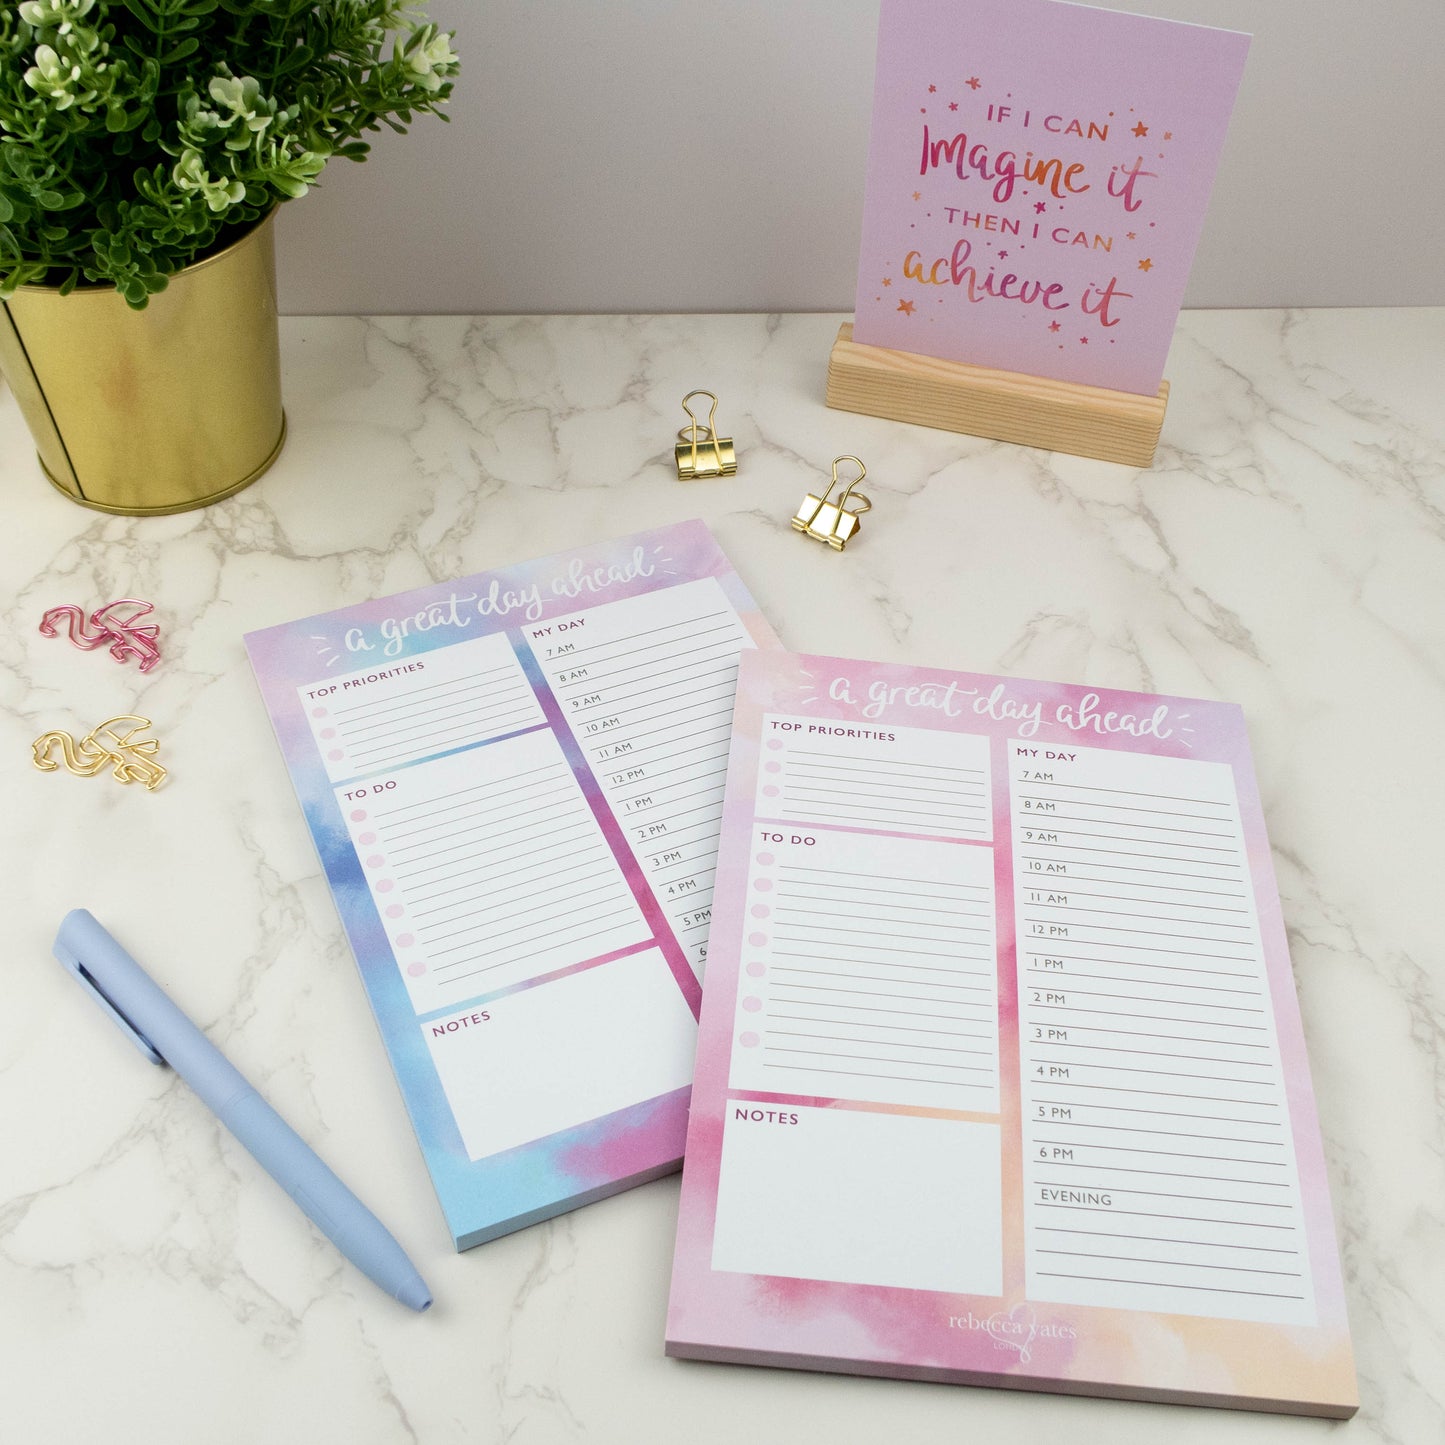 A GREAT DAY AHEAD - DAY PLANNER PAD (ROSE QUARTZ)